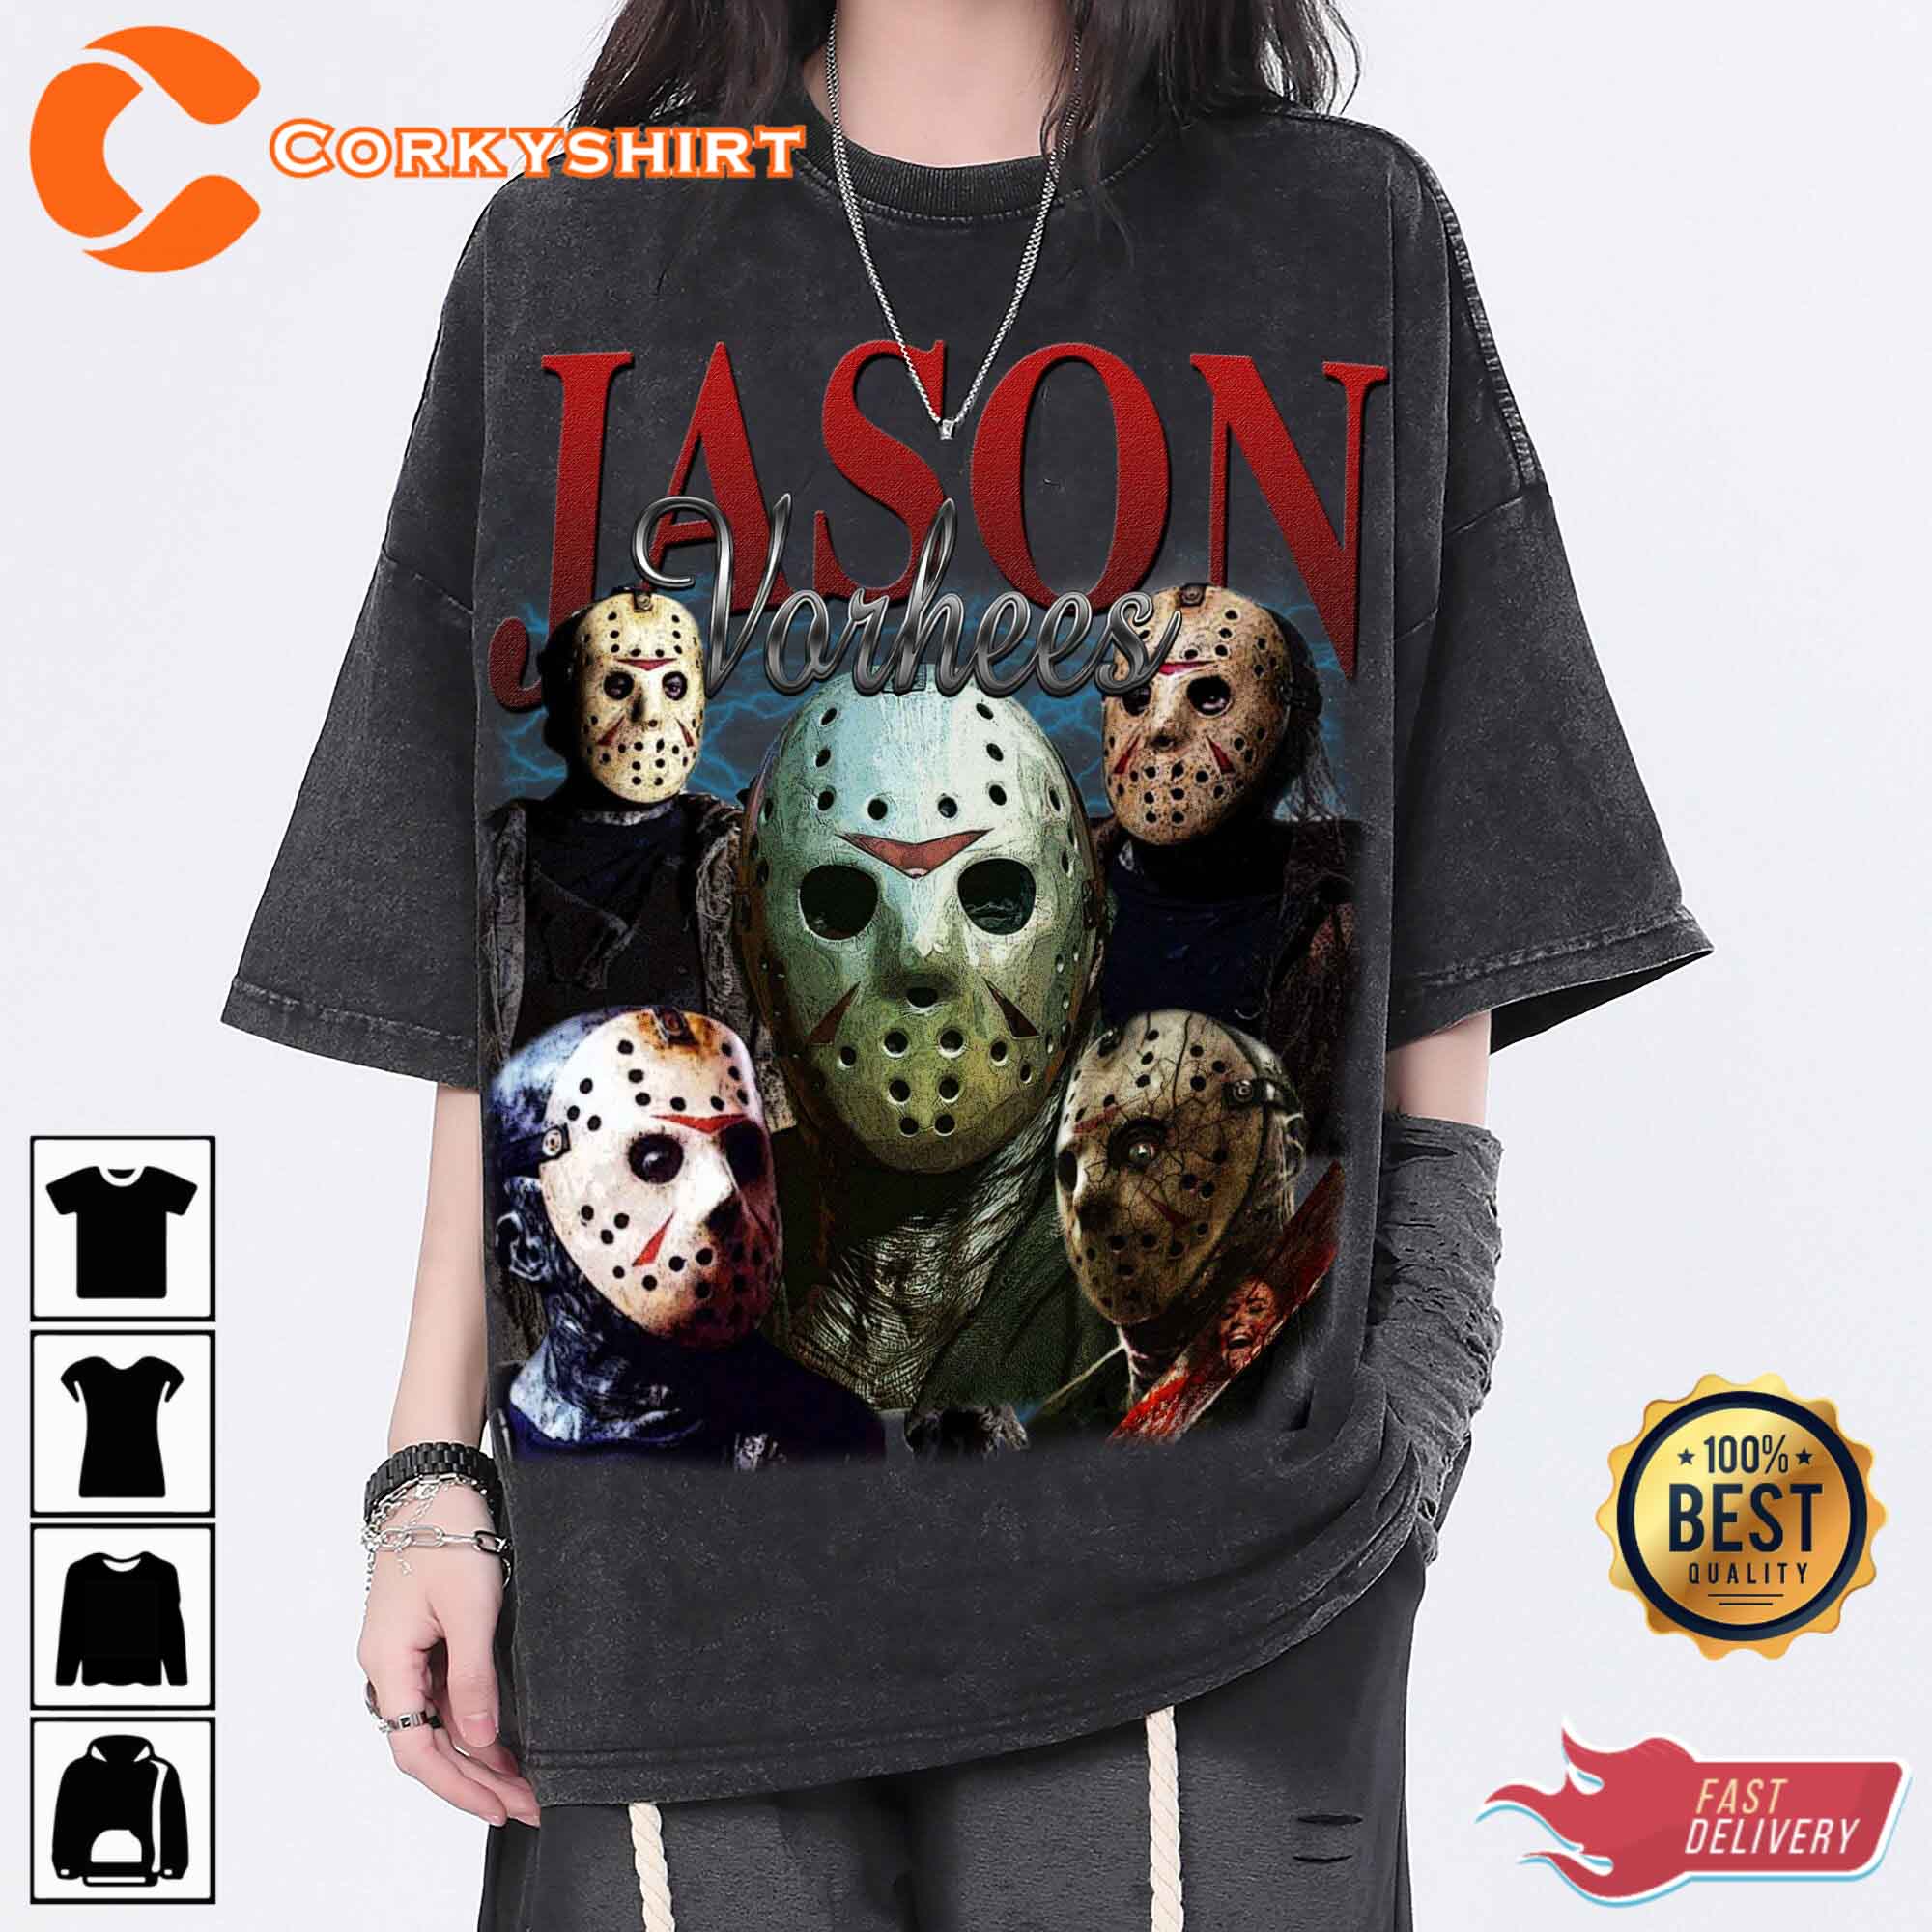 Jason Voorhees Vintage Washed Shirt Actor Homage Graphic